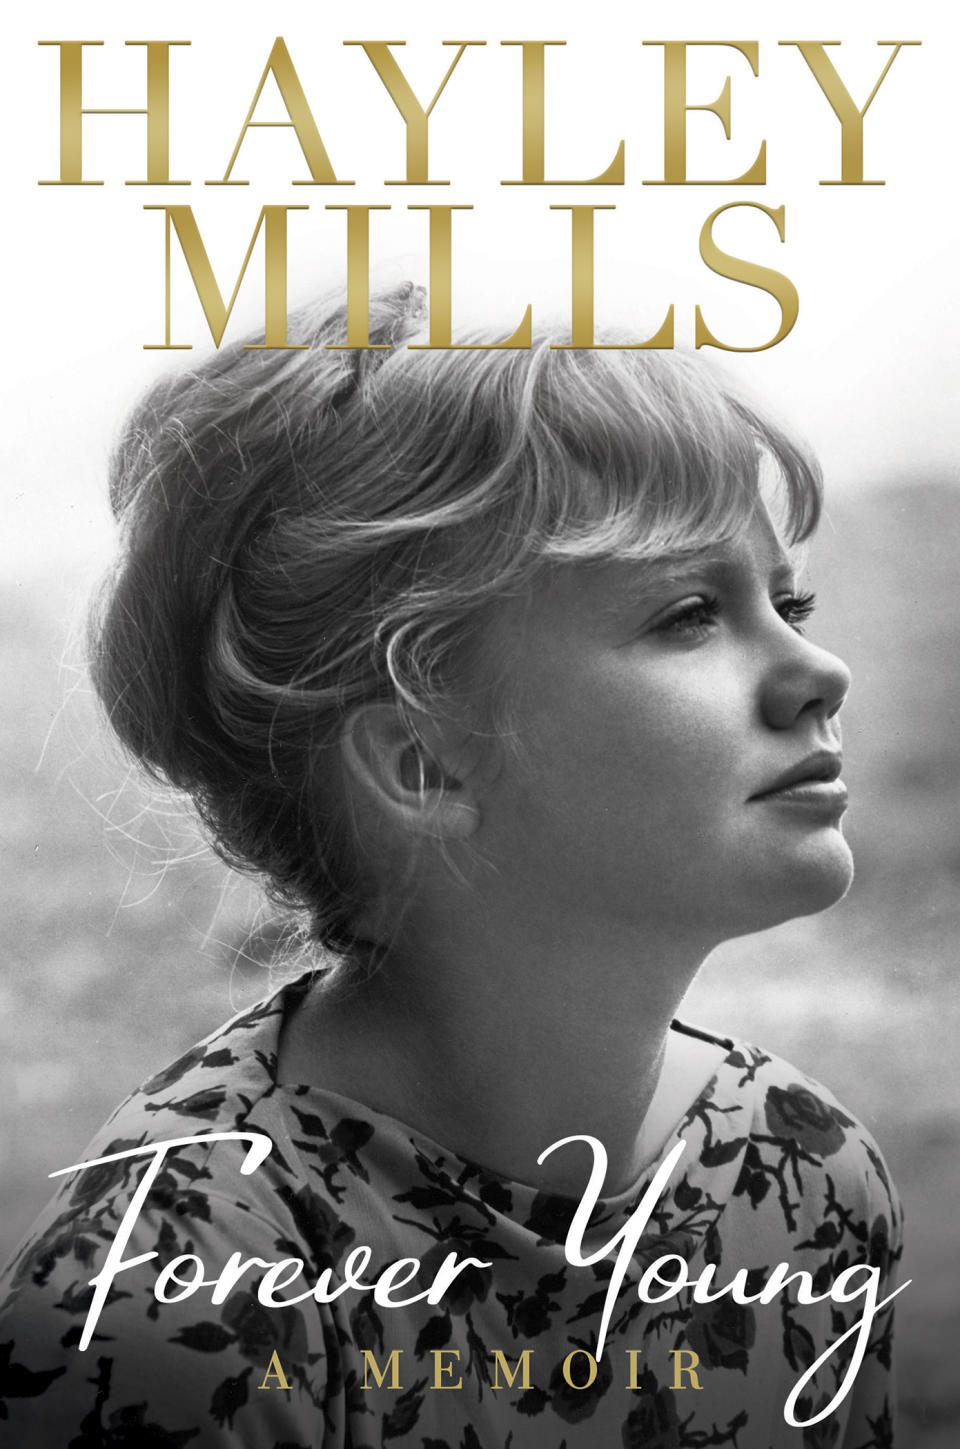 This cover image released by Grand Central Publishing shows "Forever Young," a memoir by Hayley Mills. (Grand Central Publishing via AP)